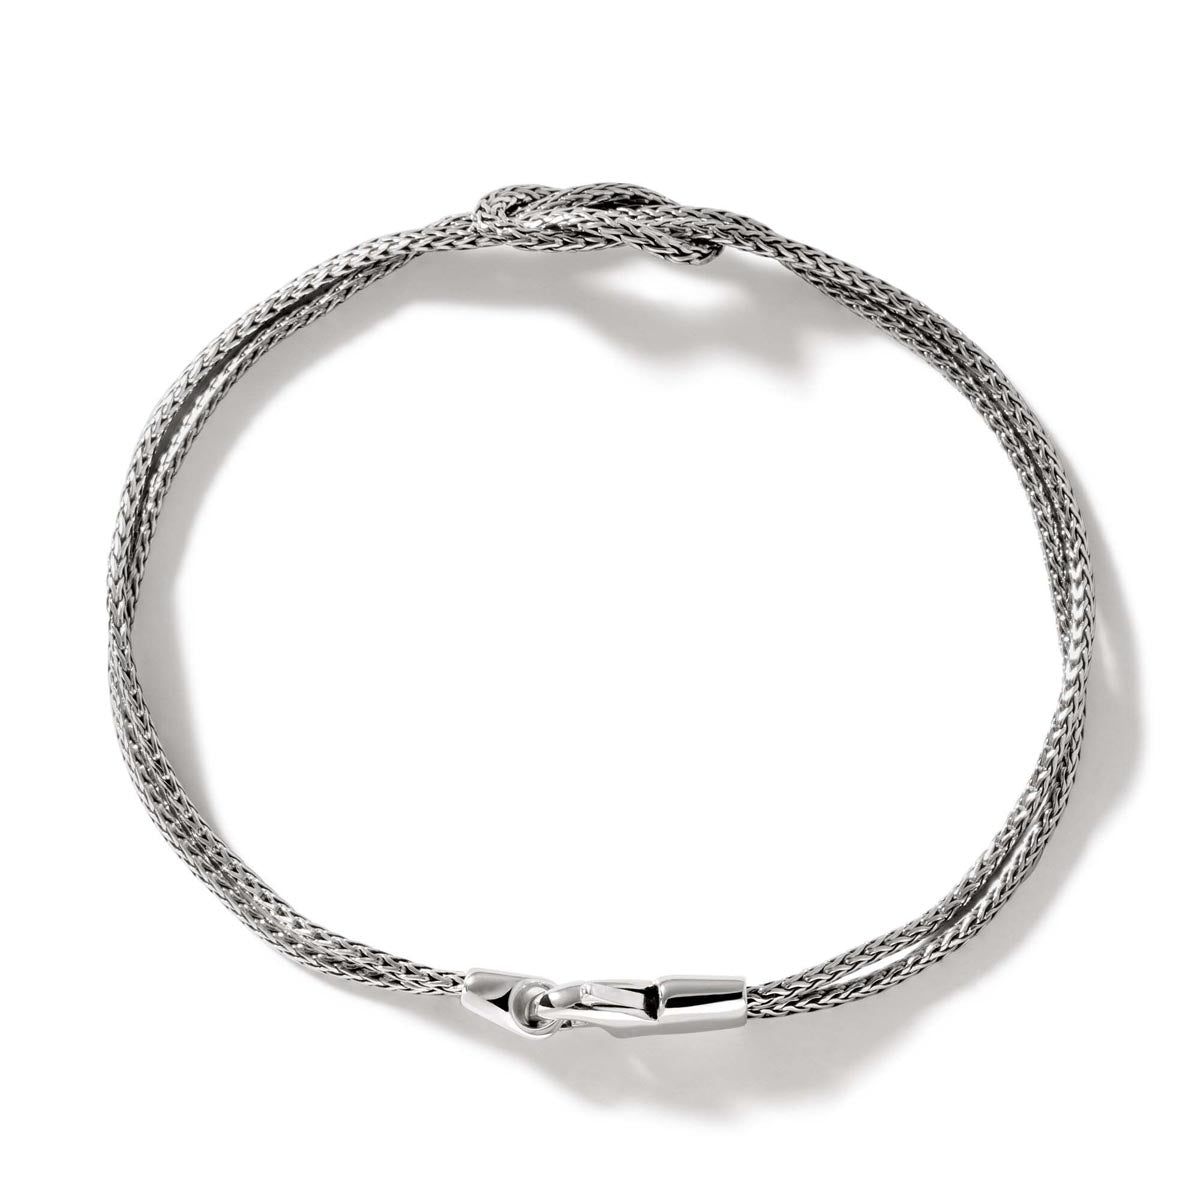 John Hardy Classic Chain Collection Manah Double Row Bracelet in Sterling Silver